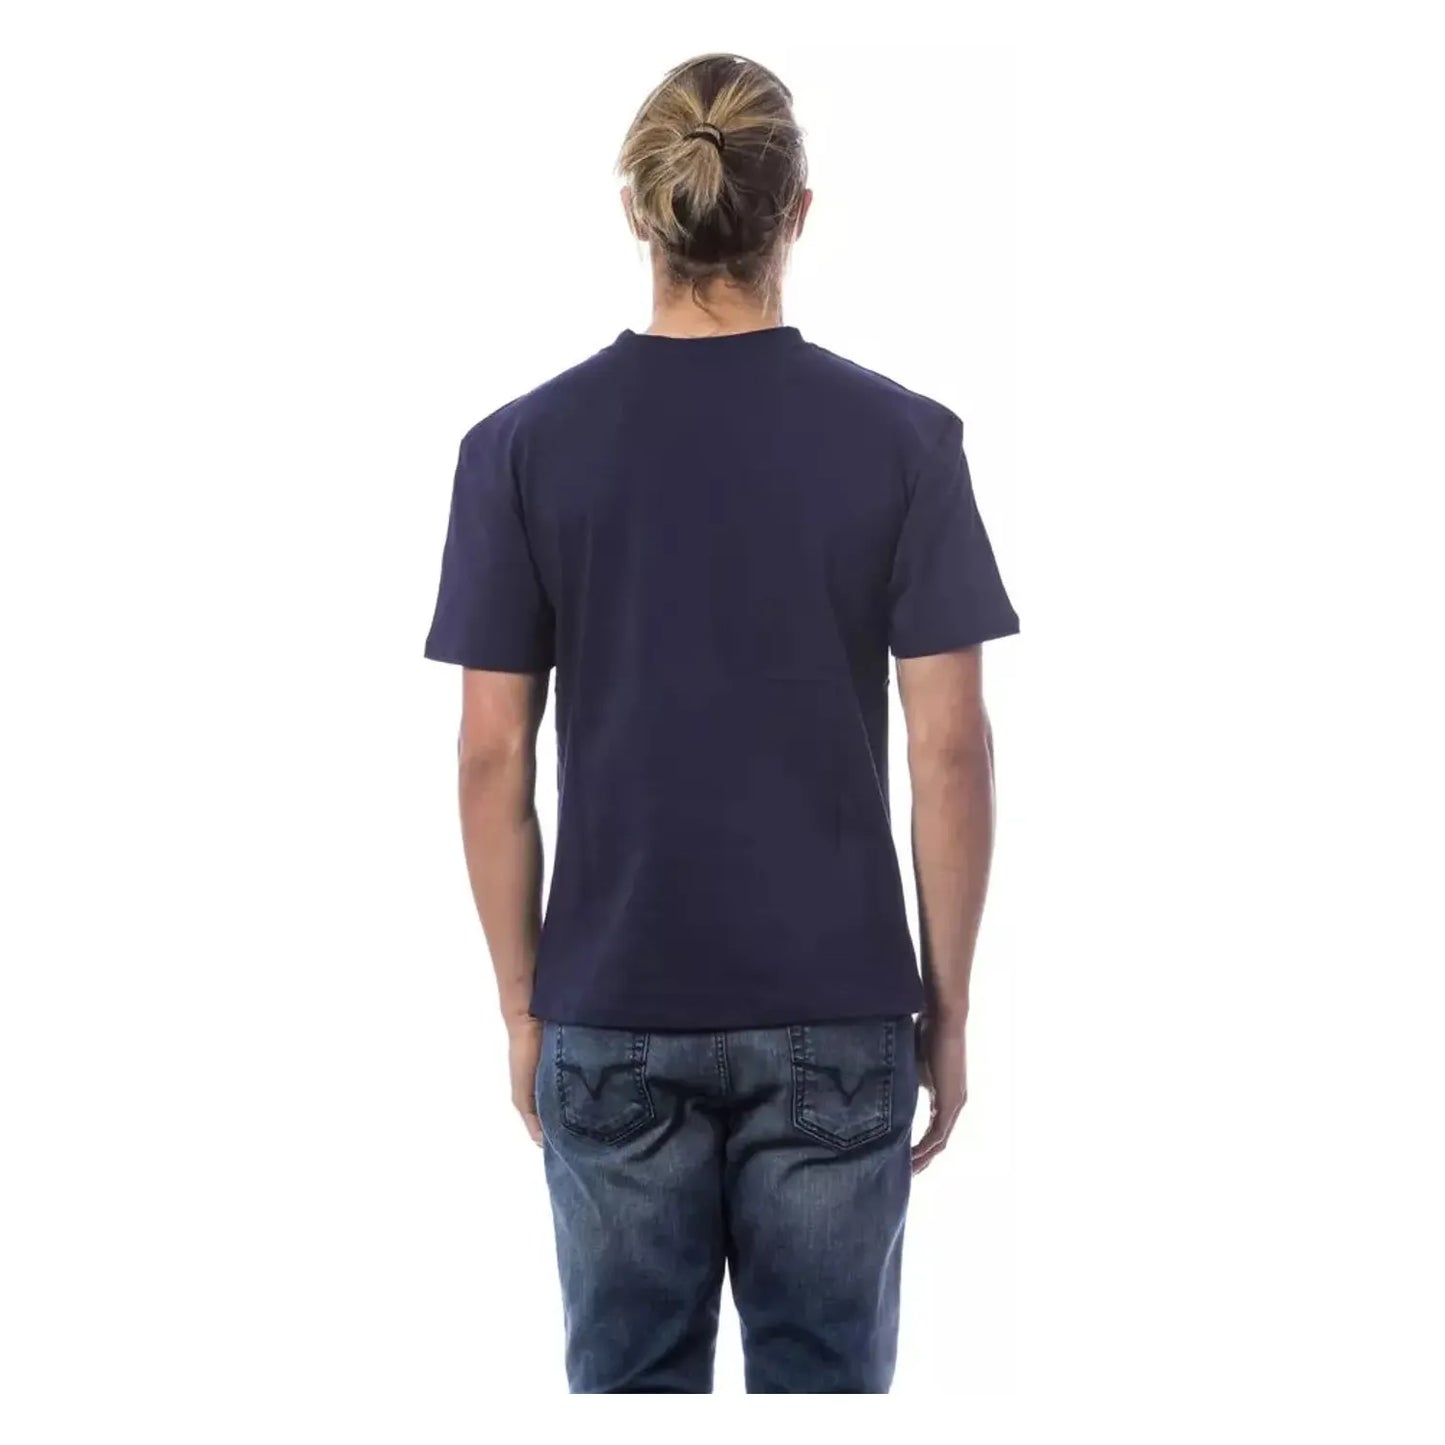 Verri Elegant Embroidered Cotton Tee blu-navy-t-shirt-1 stock_product_image_18314_468195422-16-a3d3be46-a4a.webp